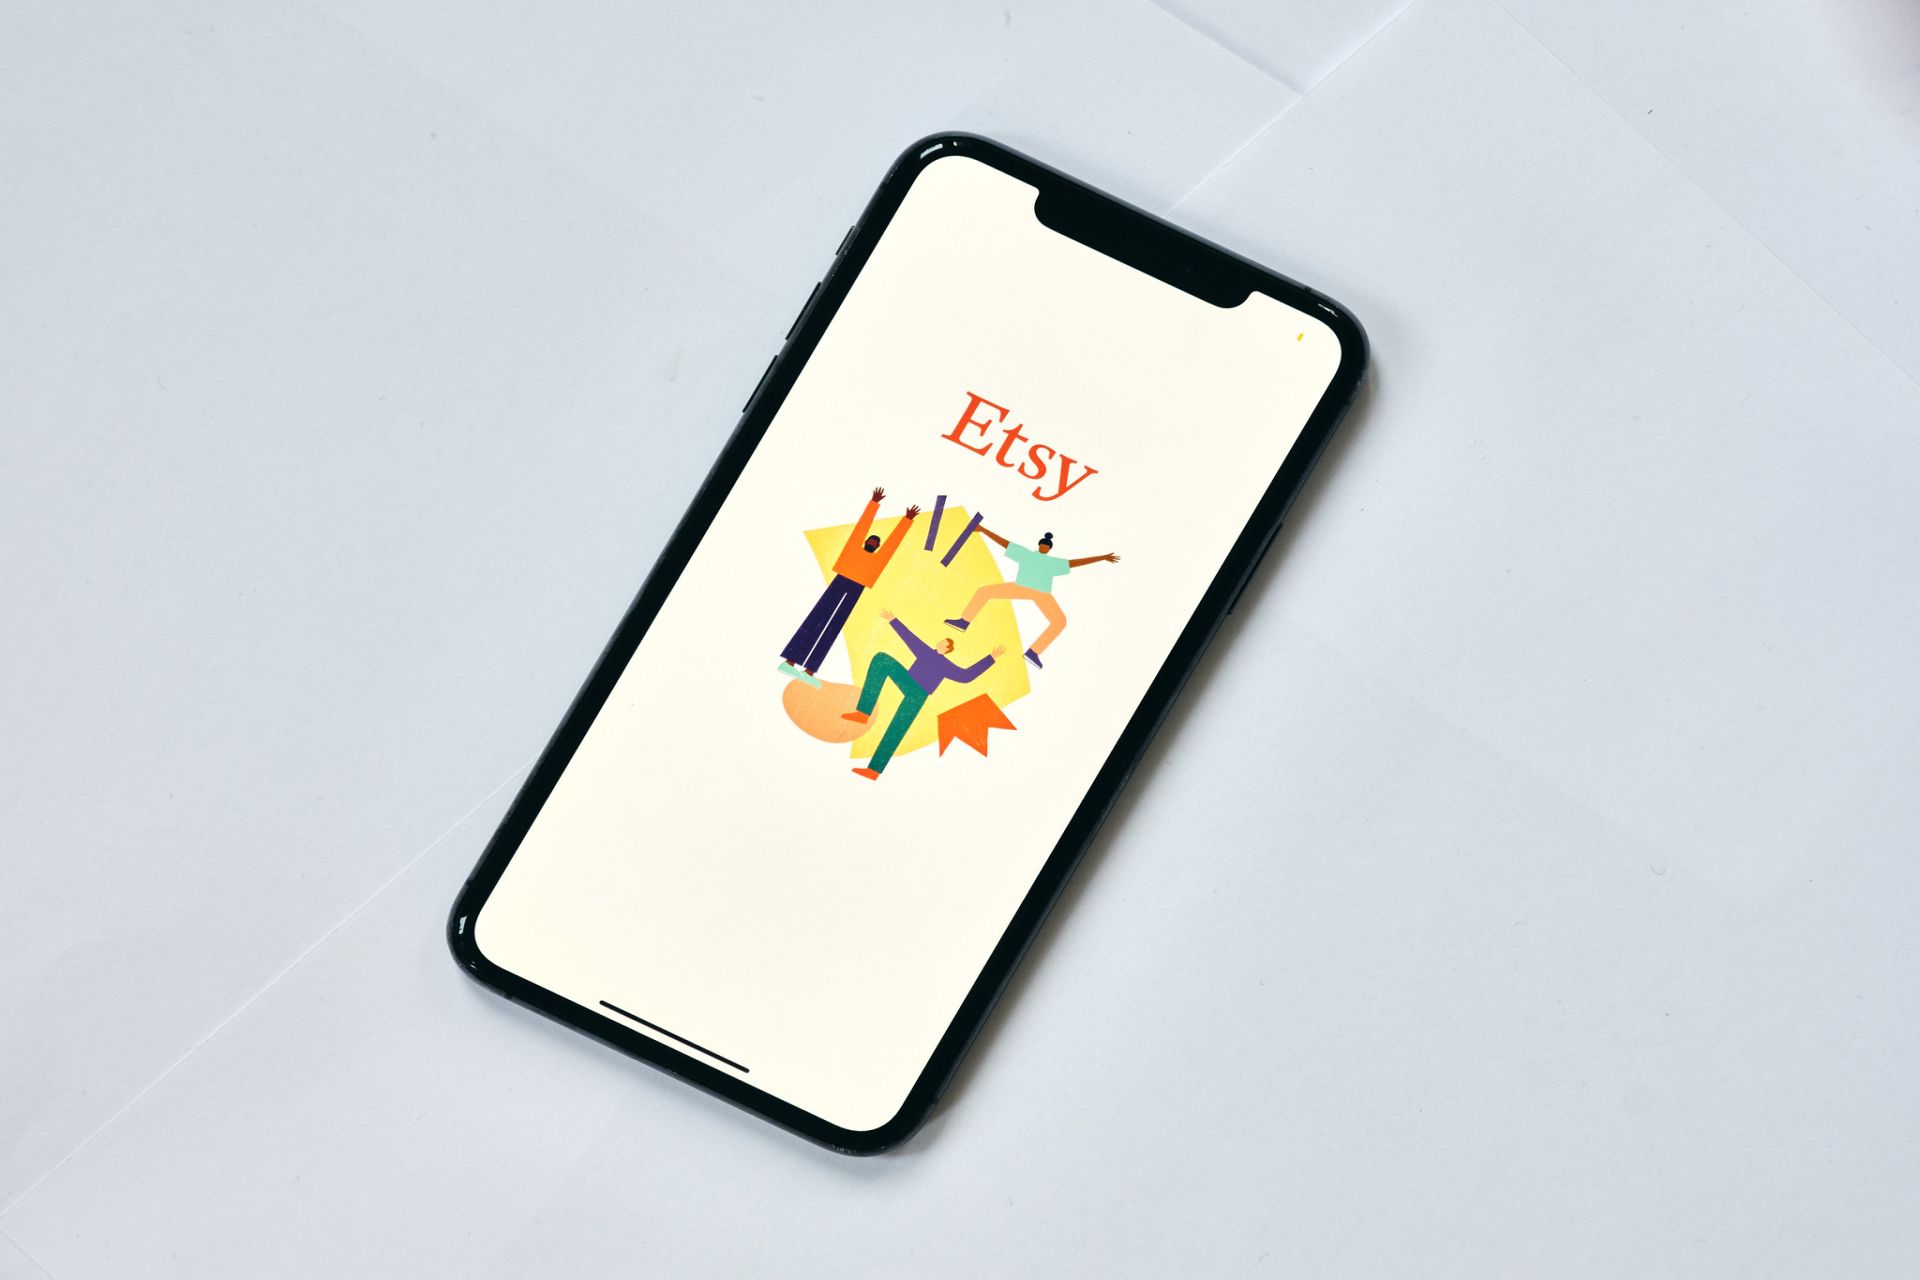 Etsy acquires Brazilian online marketplace Elo7 for $217m